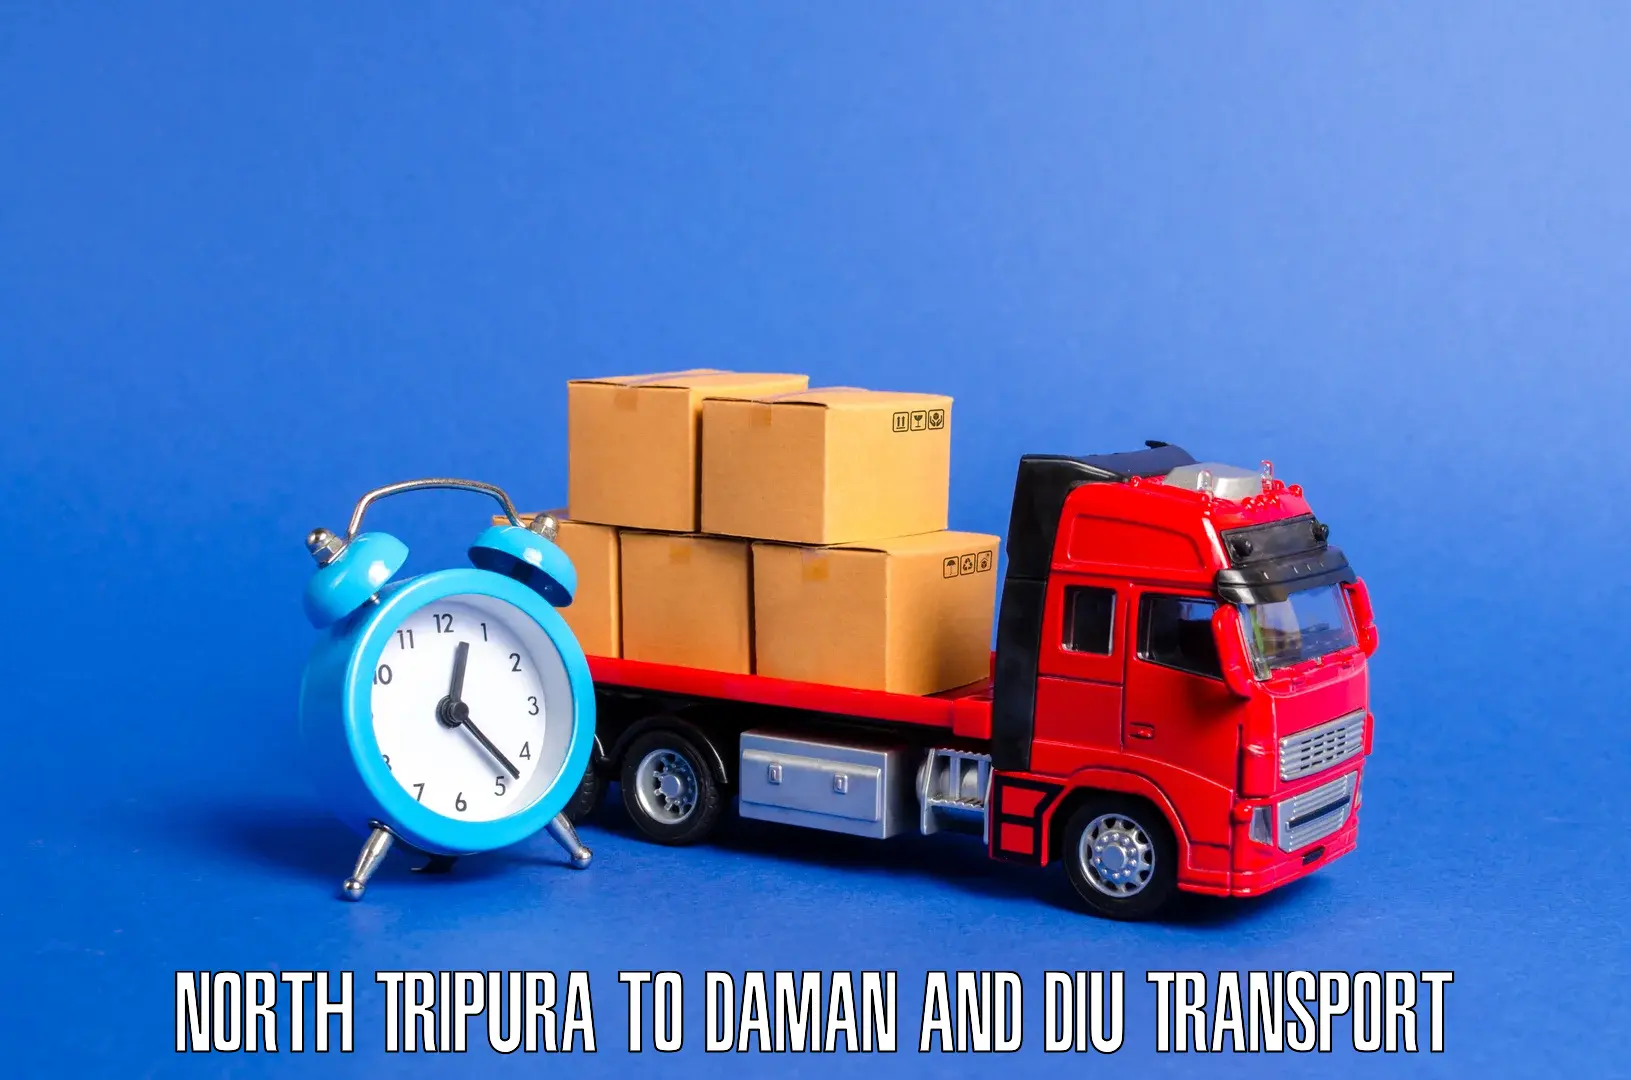 Vehicle transport services in North Tripura to Diu